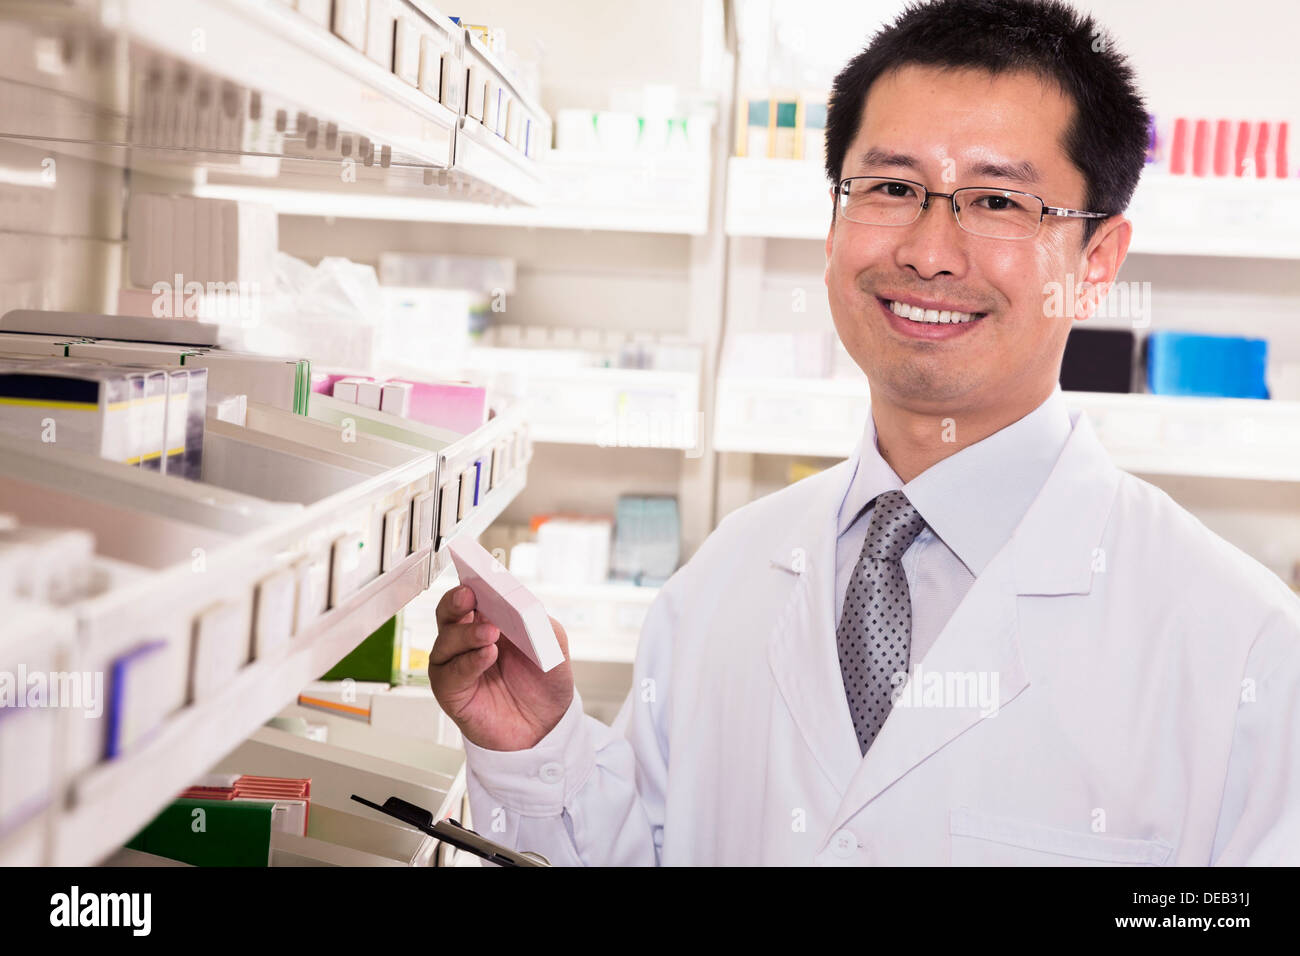 Pharmacist taking down and examining prescription medication in a pharmacy, looking at camera Stock Photo